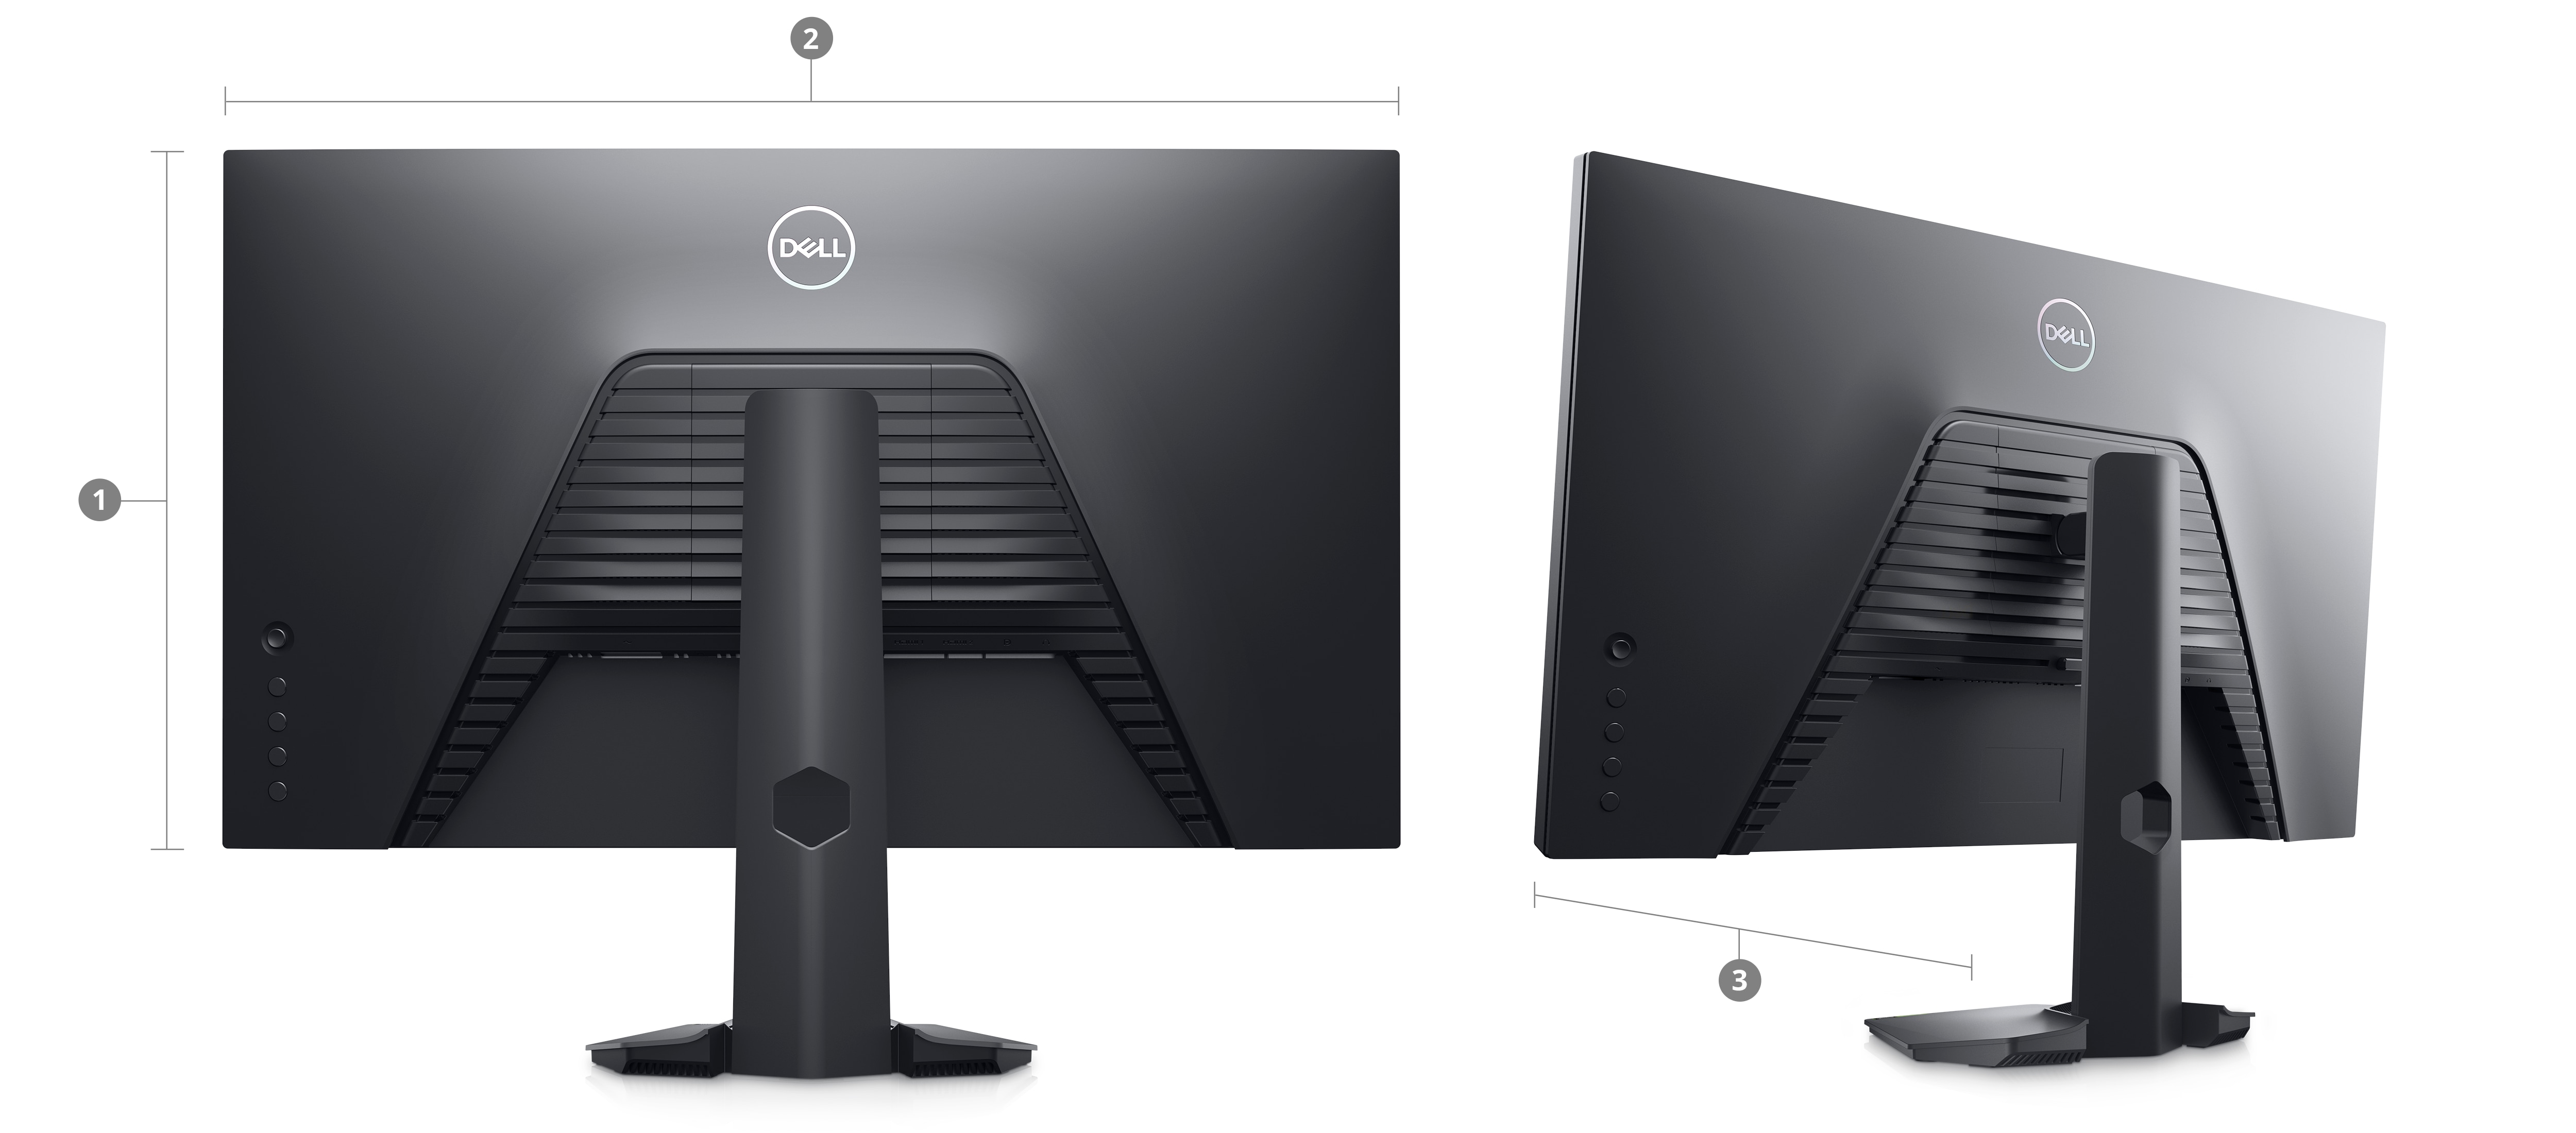 Picture of two Dell S2722HS Gaming Monitors from the back with numbers from 1 to 3, signaling dimensions & weight.